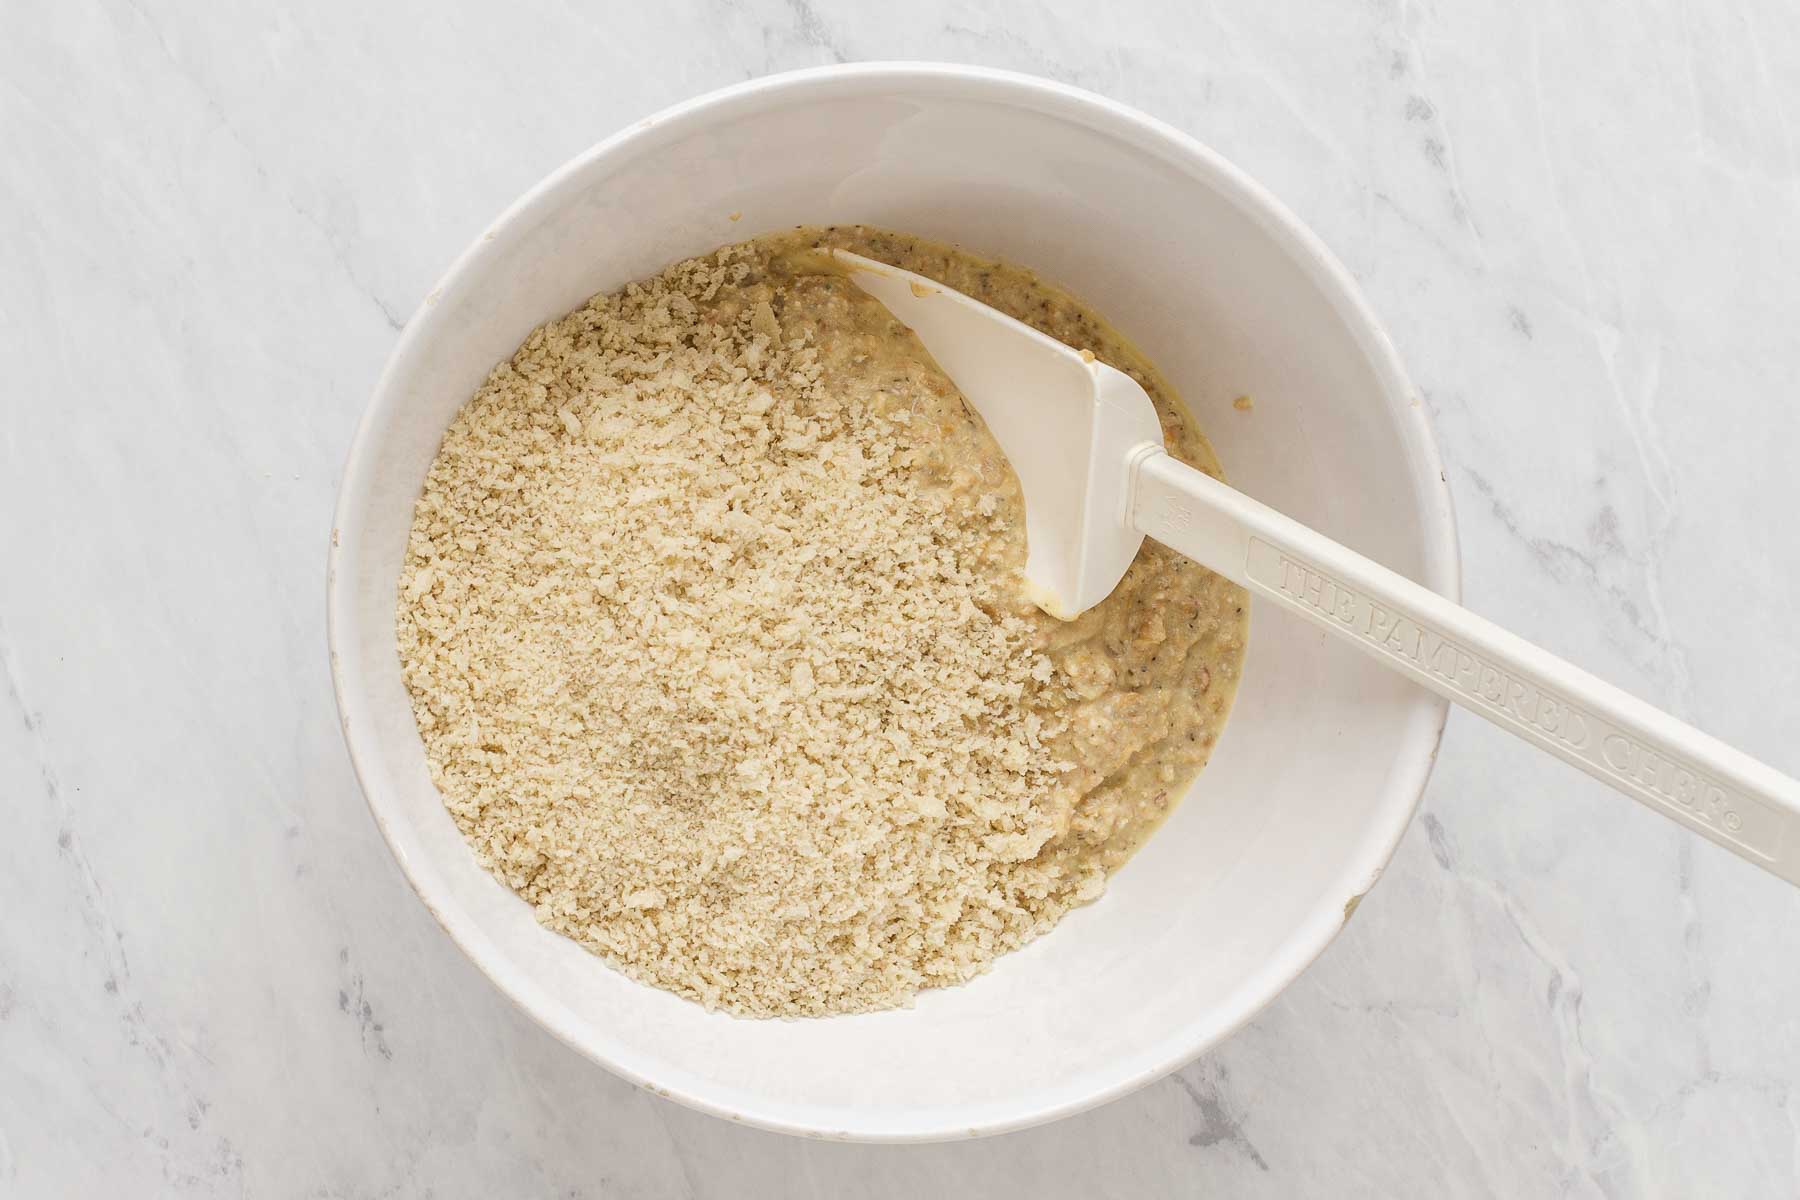 Bowl with bread crumbs and yellow mixture being stirred by white spatula.